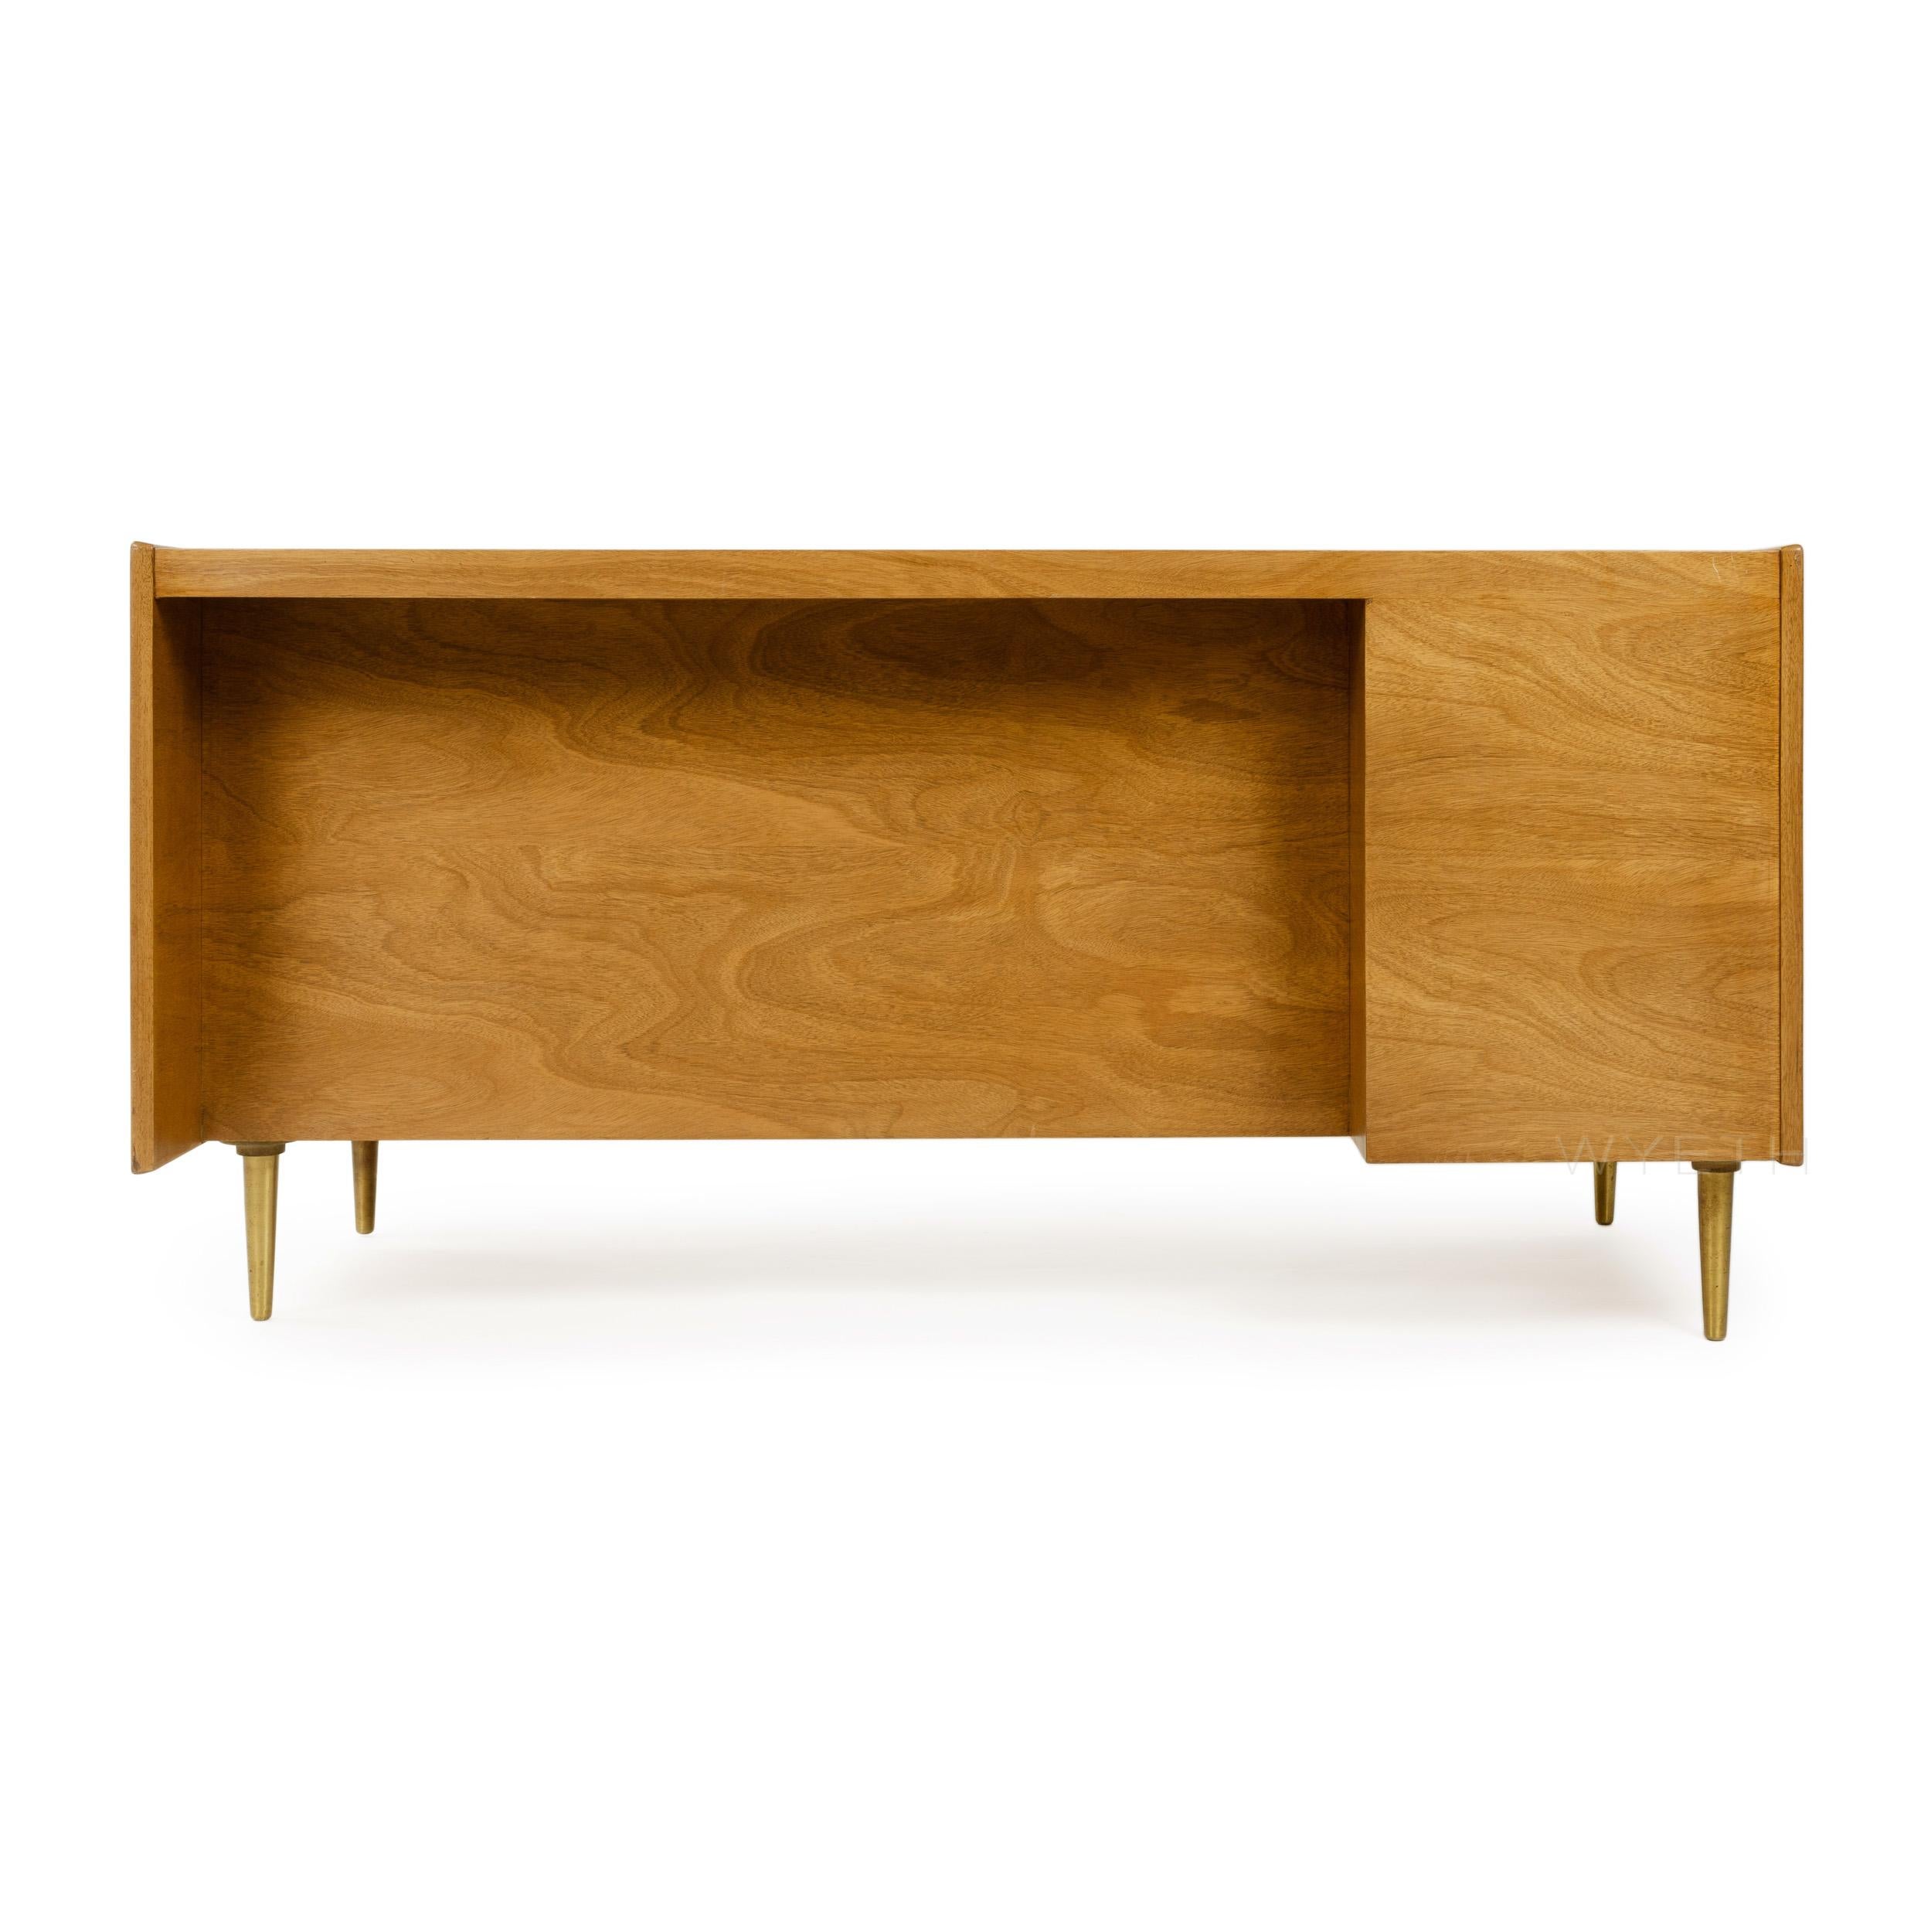 Bleached 1950s Double Pedestal Desk by Edward Wormley for Dunbar